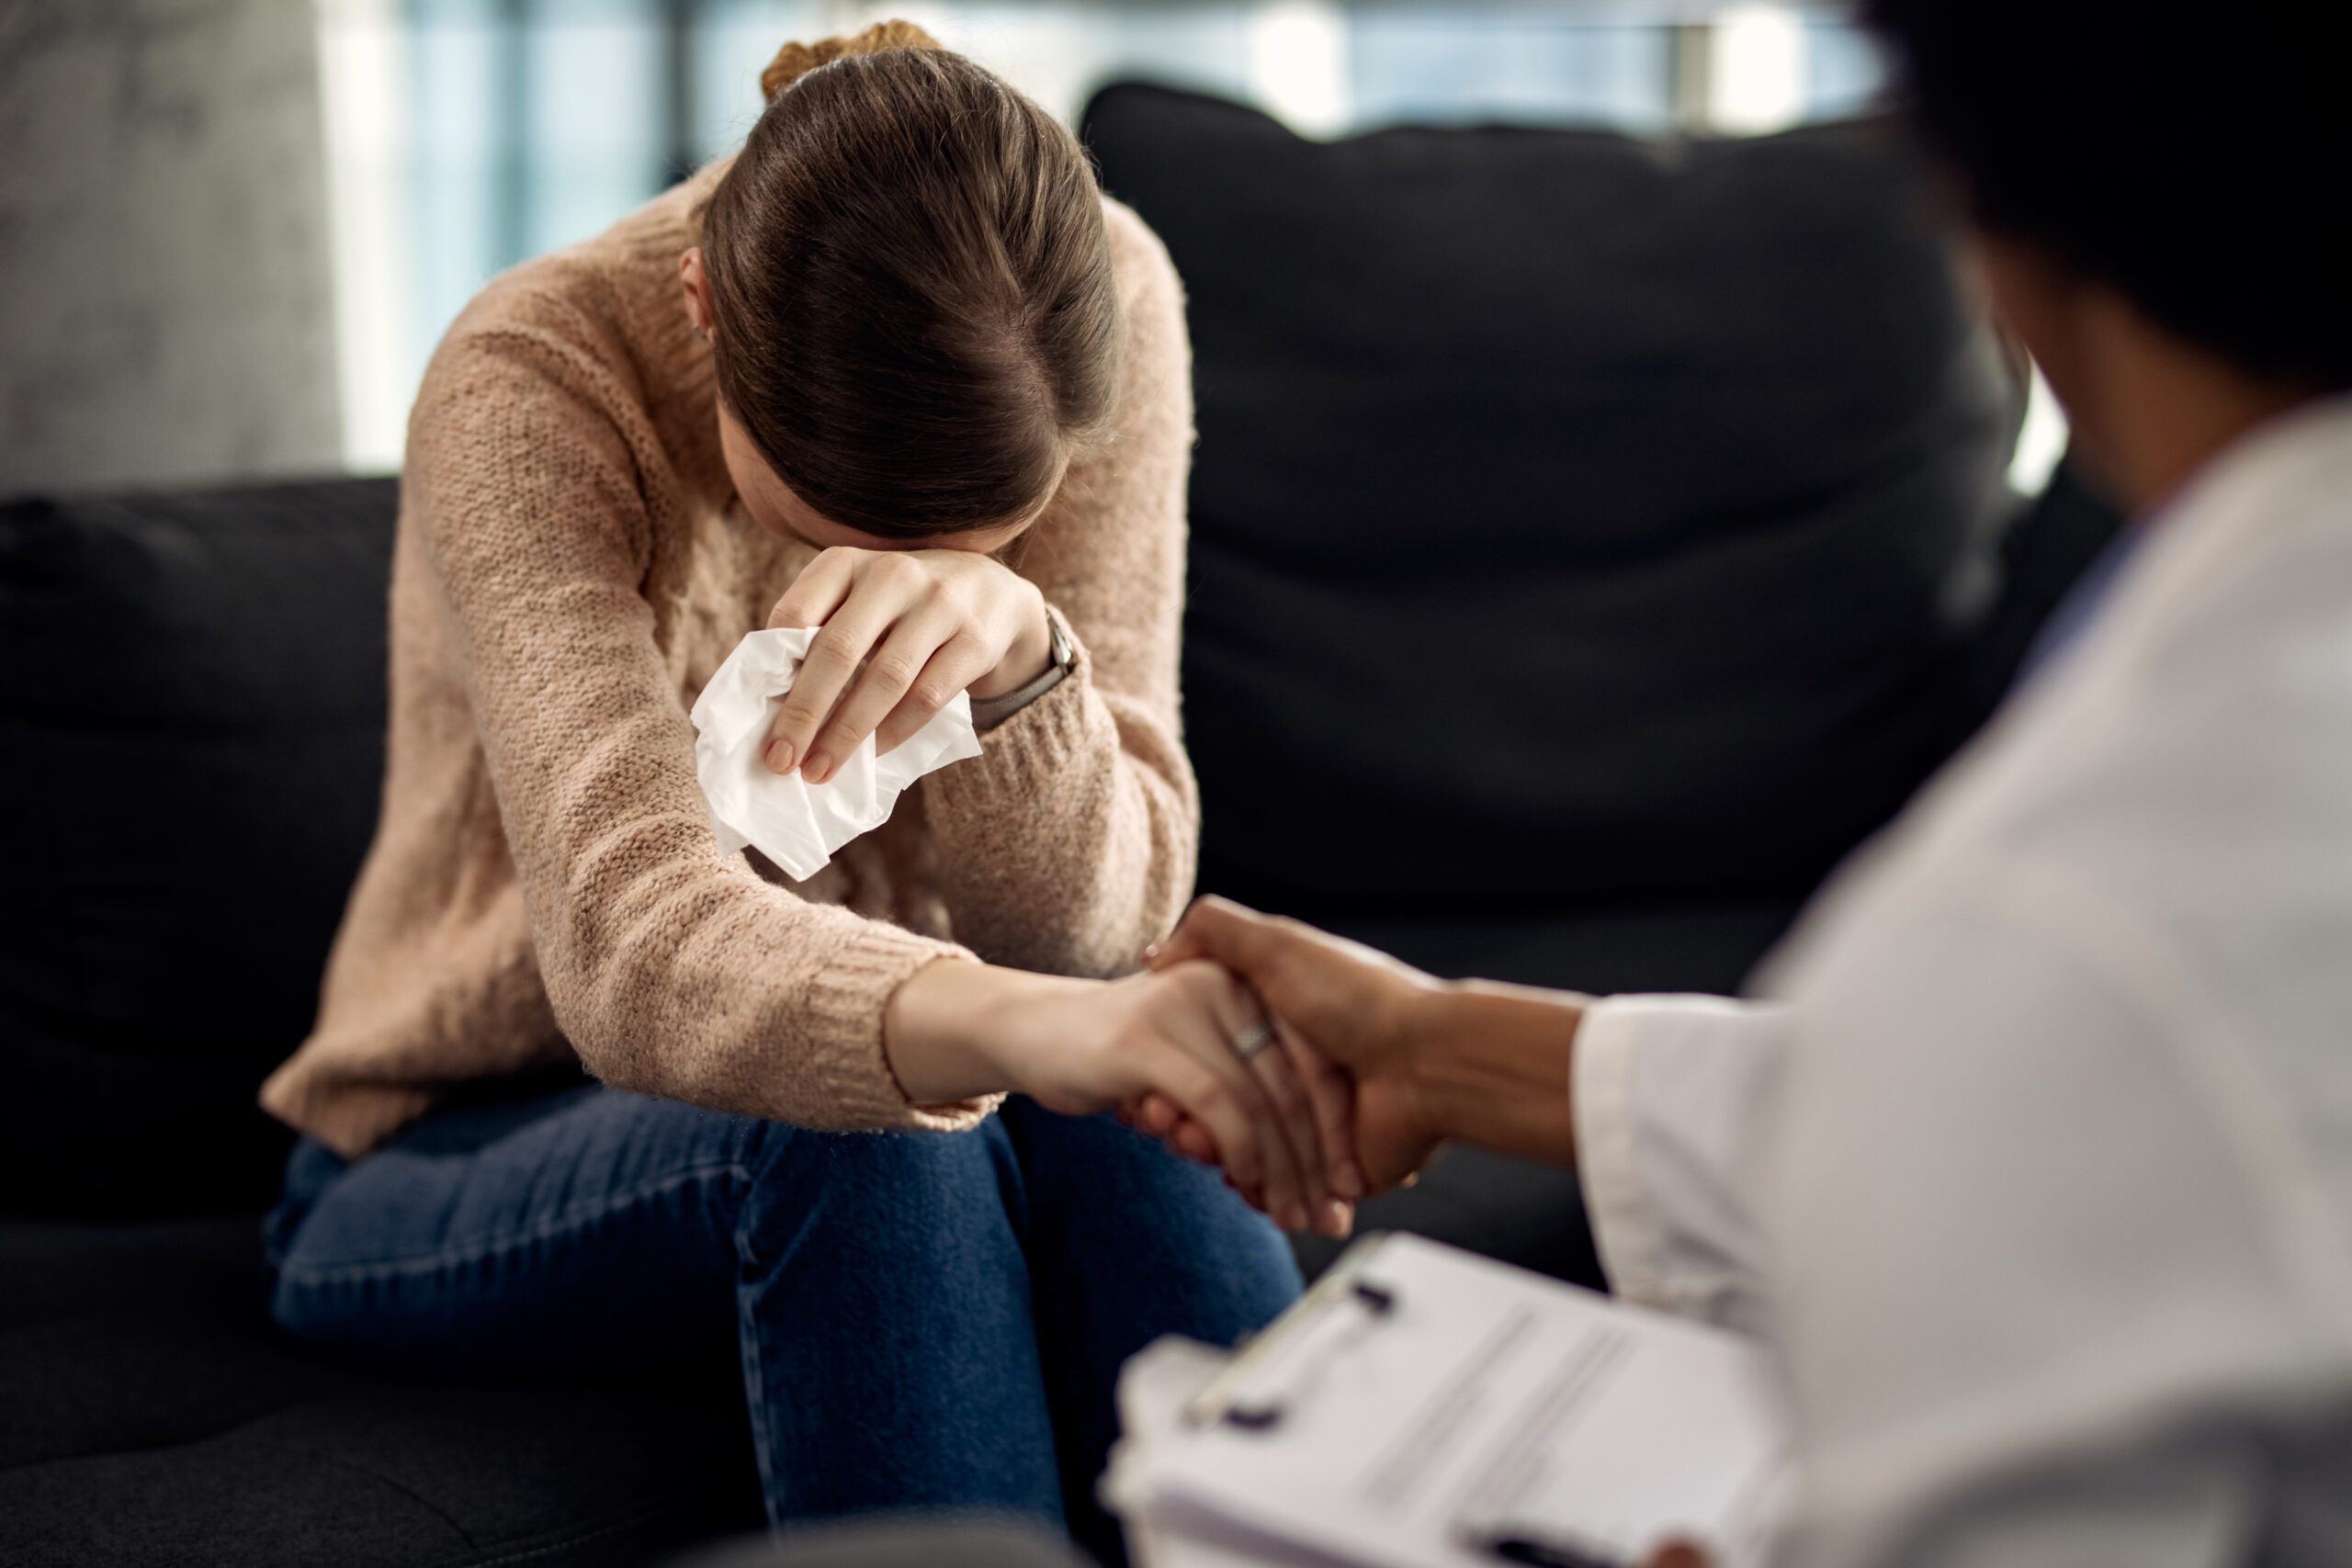 Sad woman crying while holding hands with her psychotherapist at doctor's office.